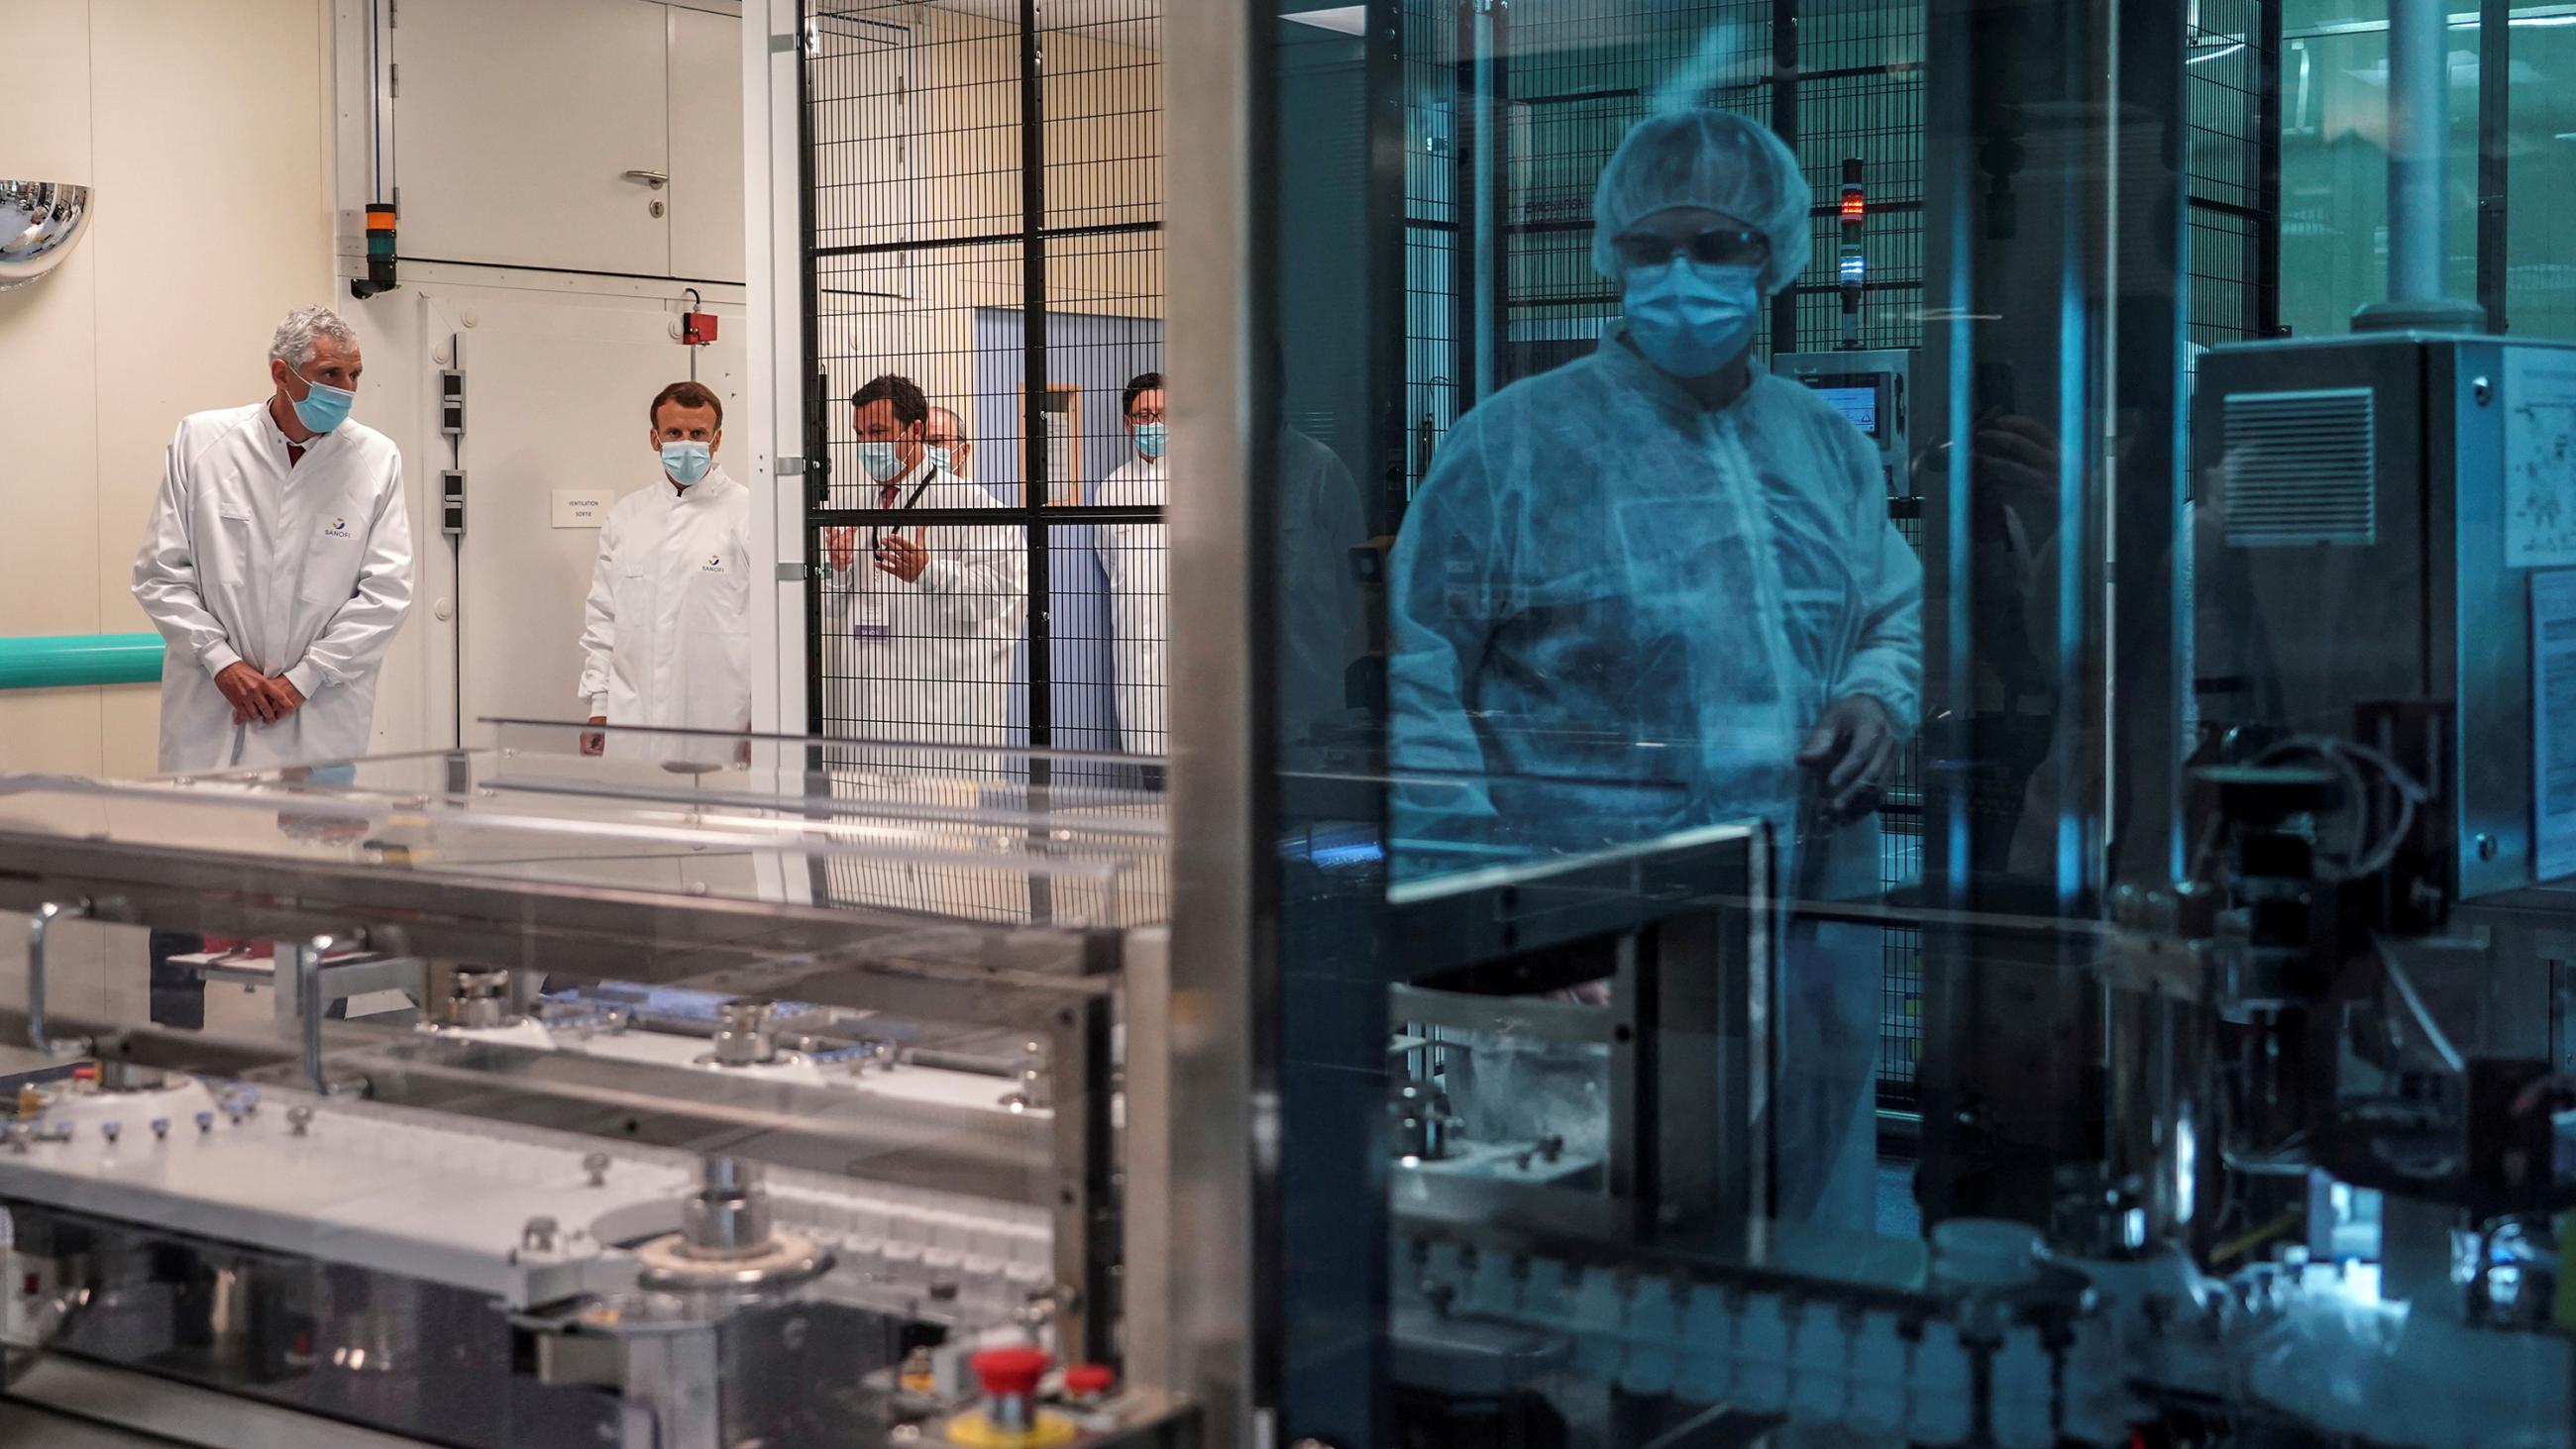 The photo shows the French president and an entourage in a high-tech biomedical facility